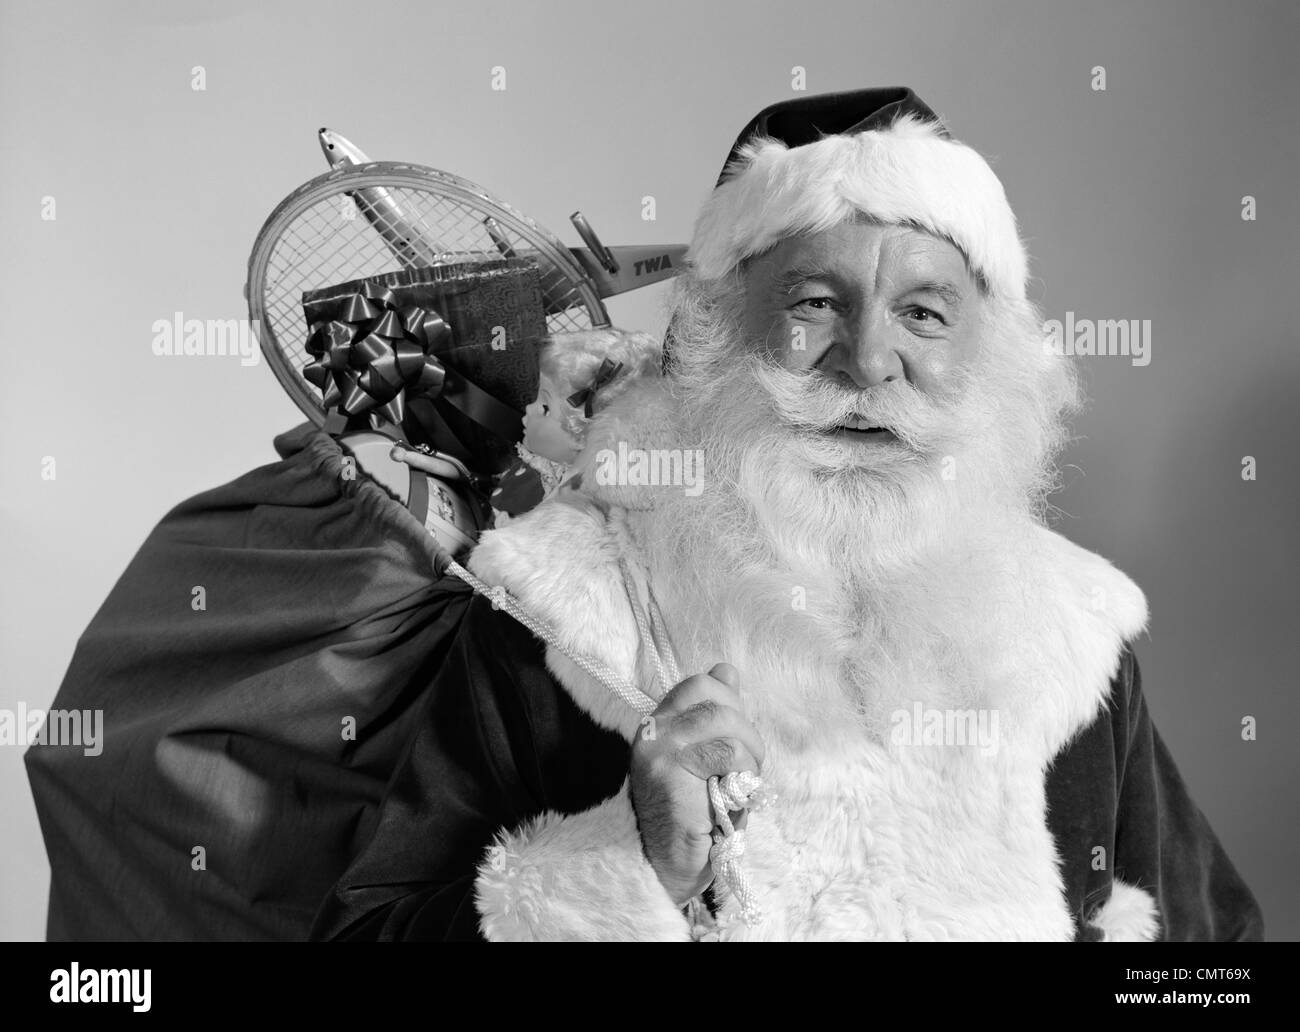 1960s PORTRAIT OF SMILING SANTA CLAUS WITH SACK OF CHRISTMAS TOY PRESENTS SLUNG OVER HIS SHOULDER Stock Photo